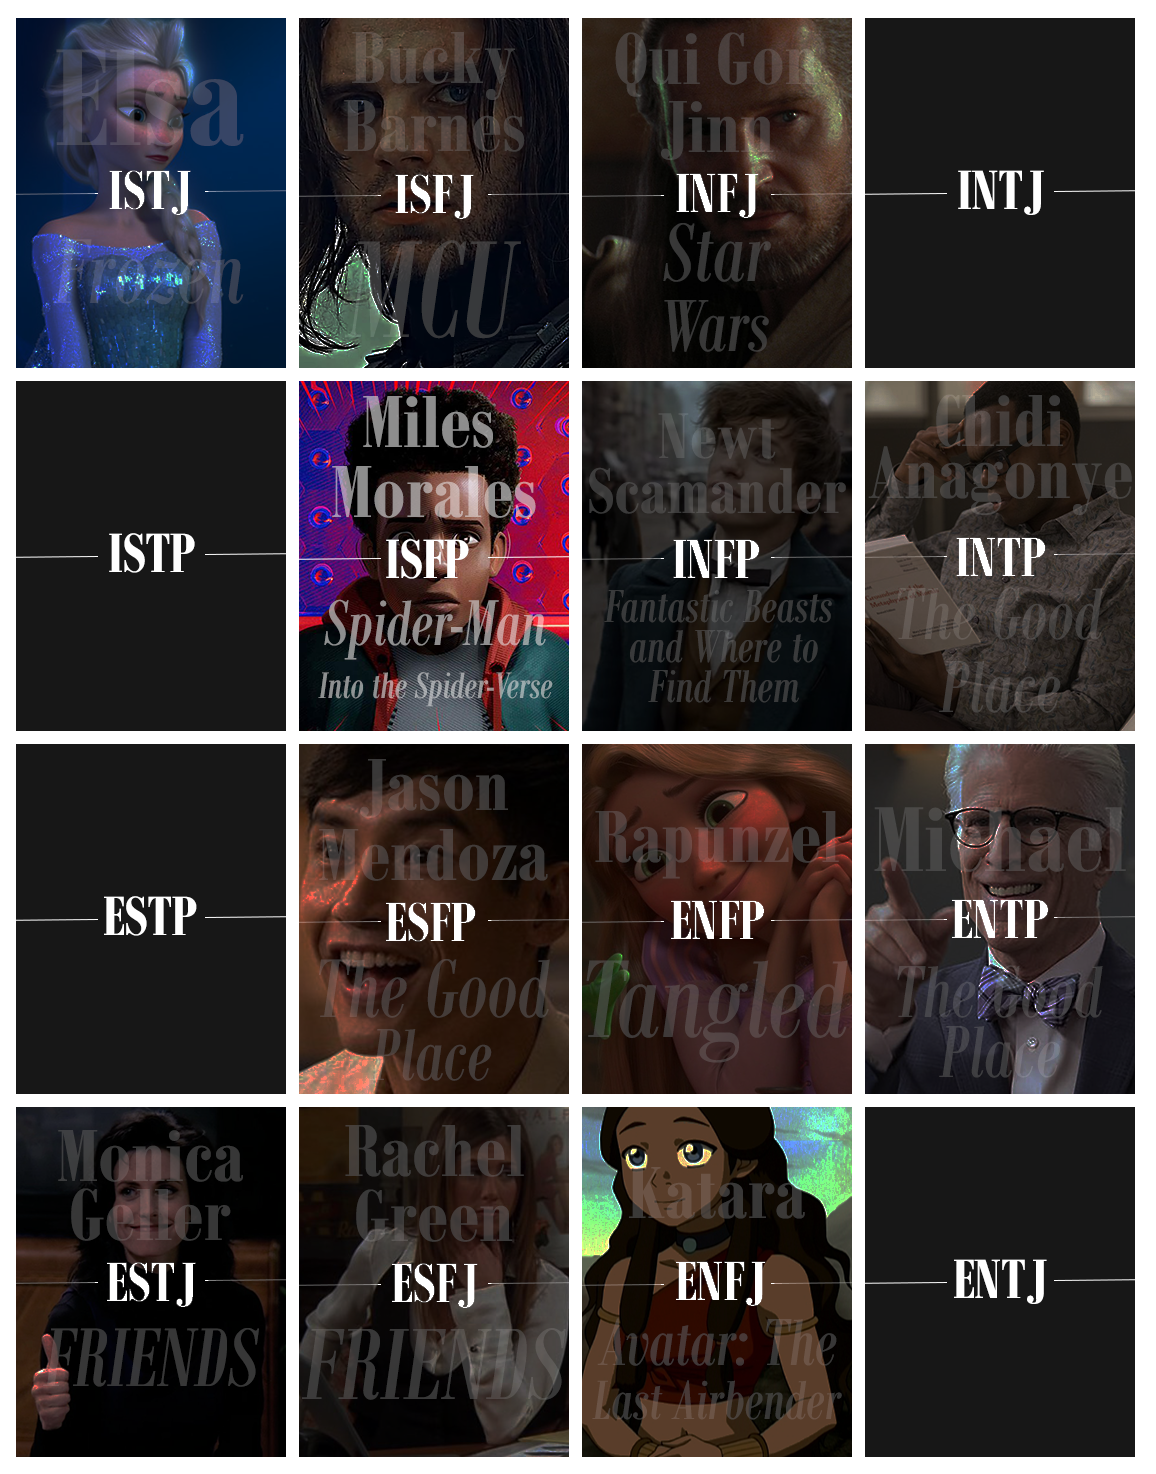 MBTI Personalities of Famous Literary Characters - Part Two - Bookstr